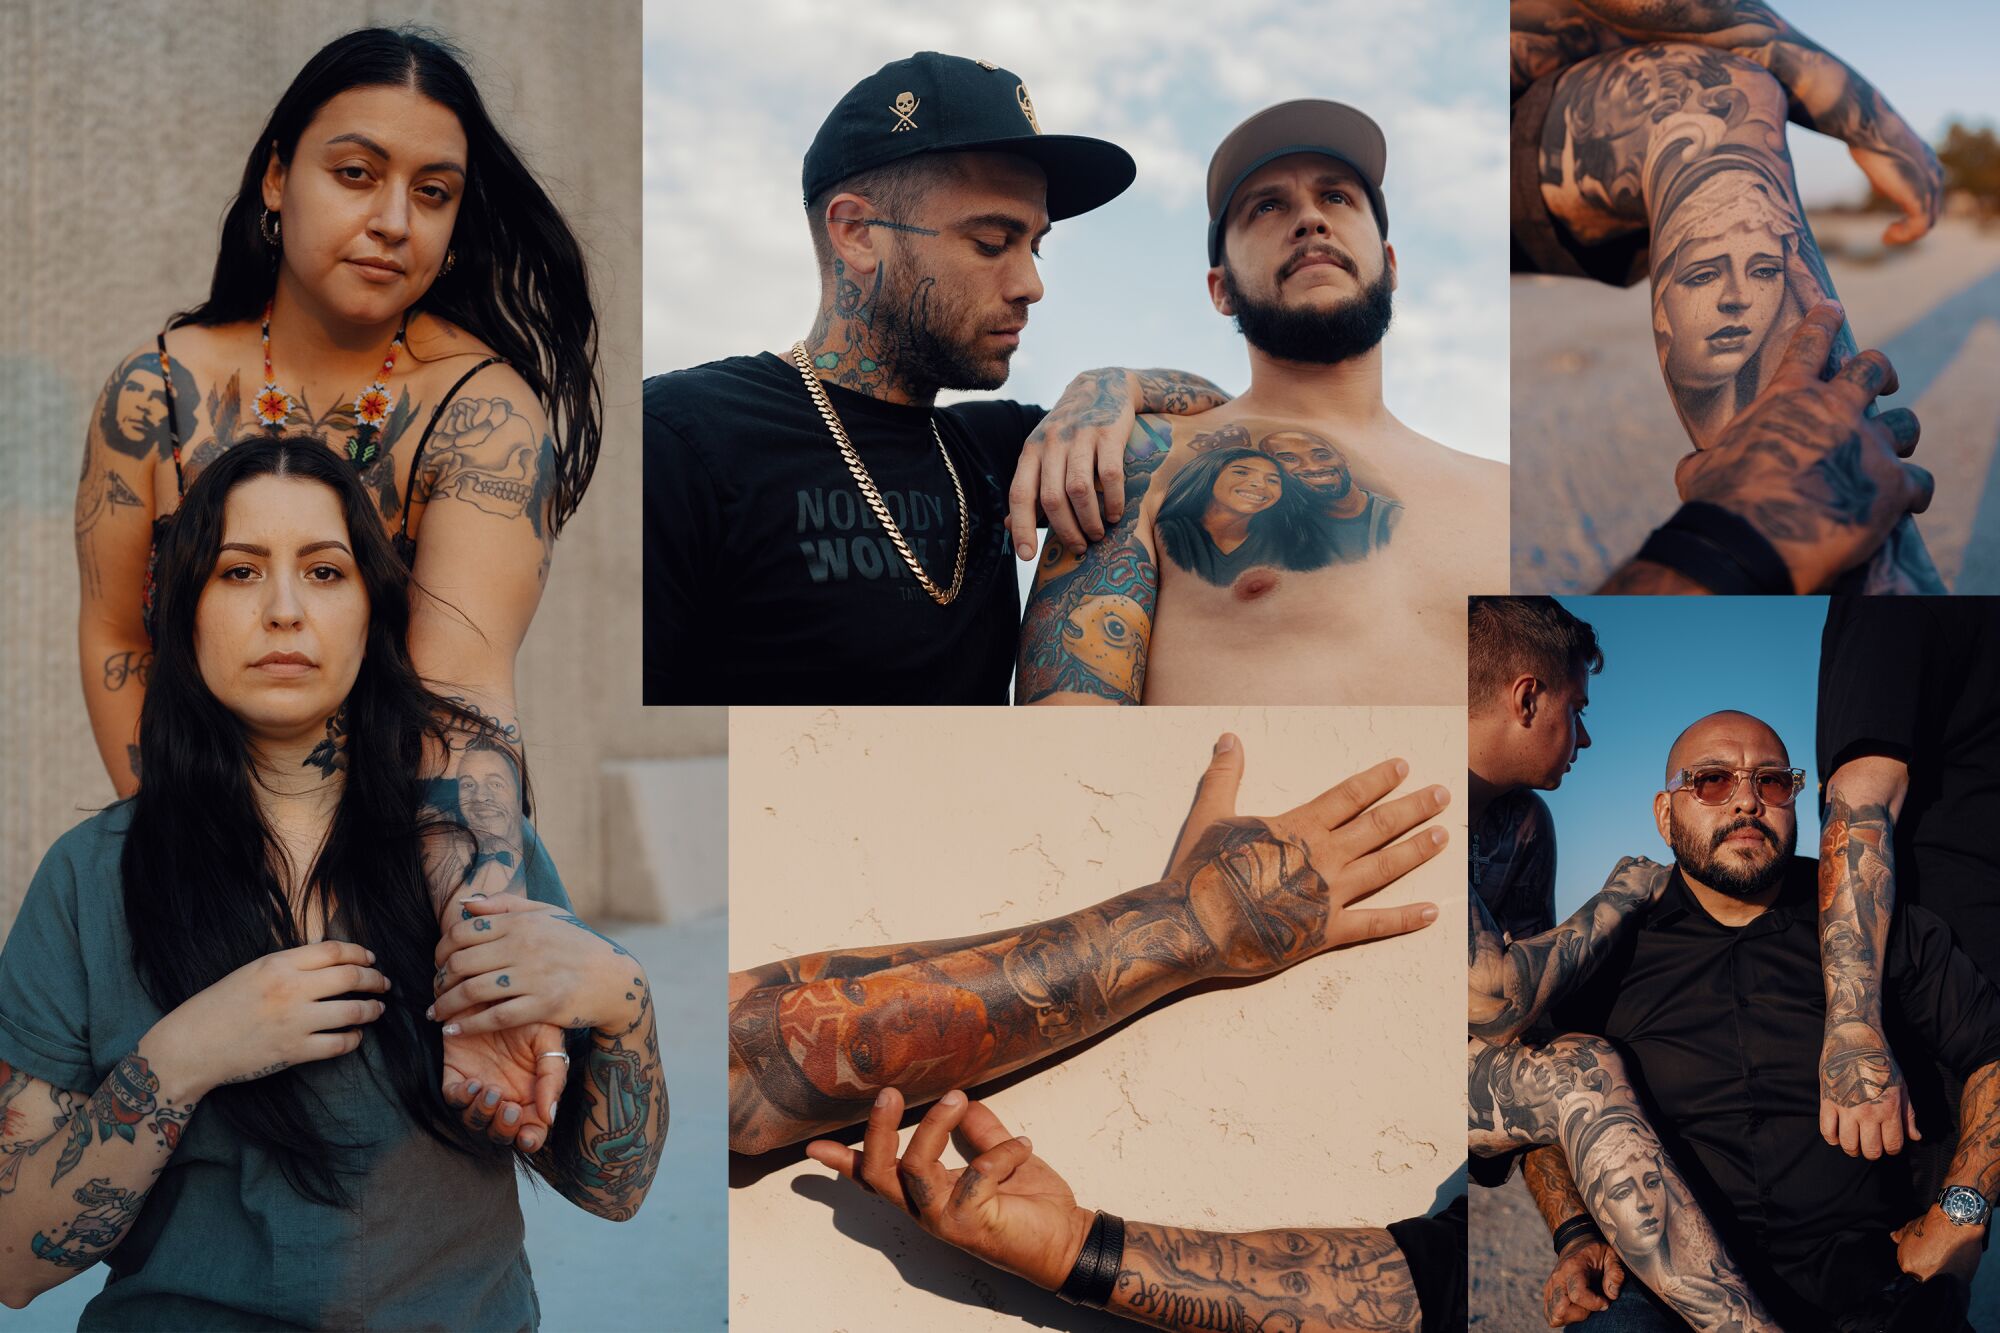 collage of three tattoo artists—Arlene Salinas, Steve Butcher, and Nikko Hurtado—and their clients